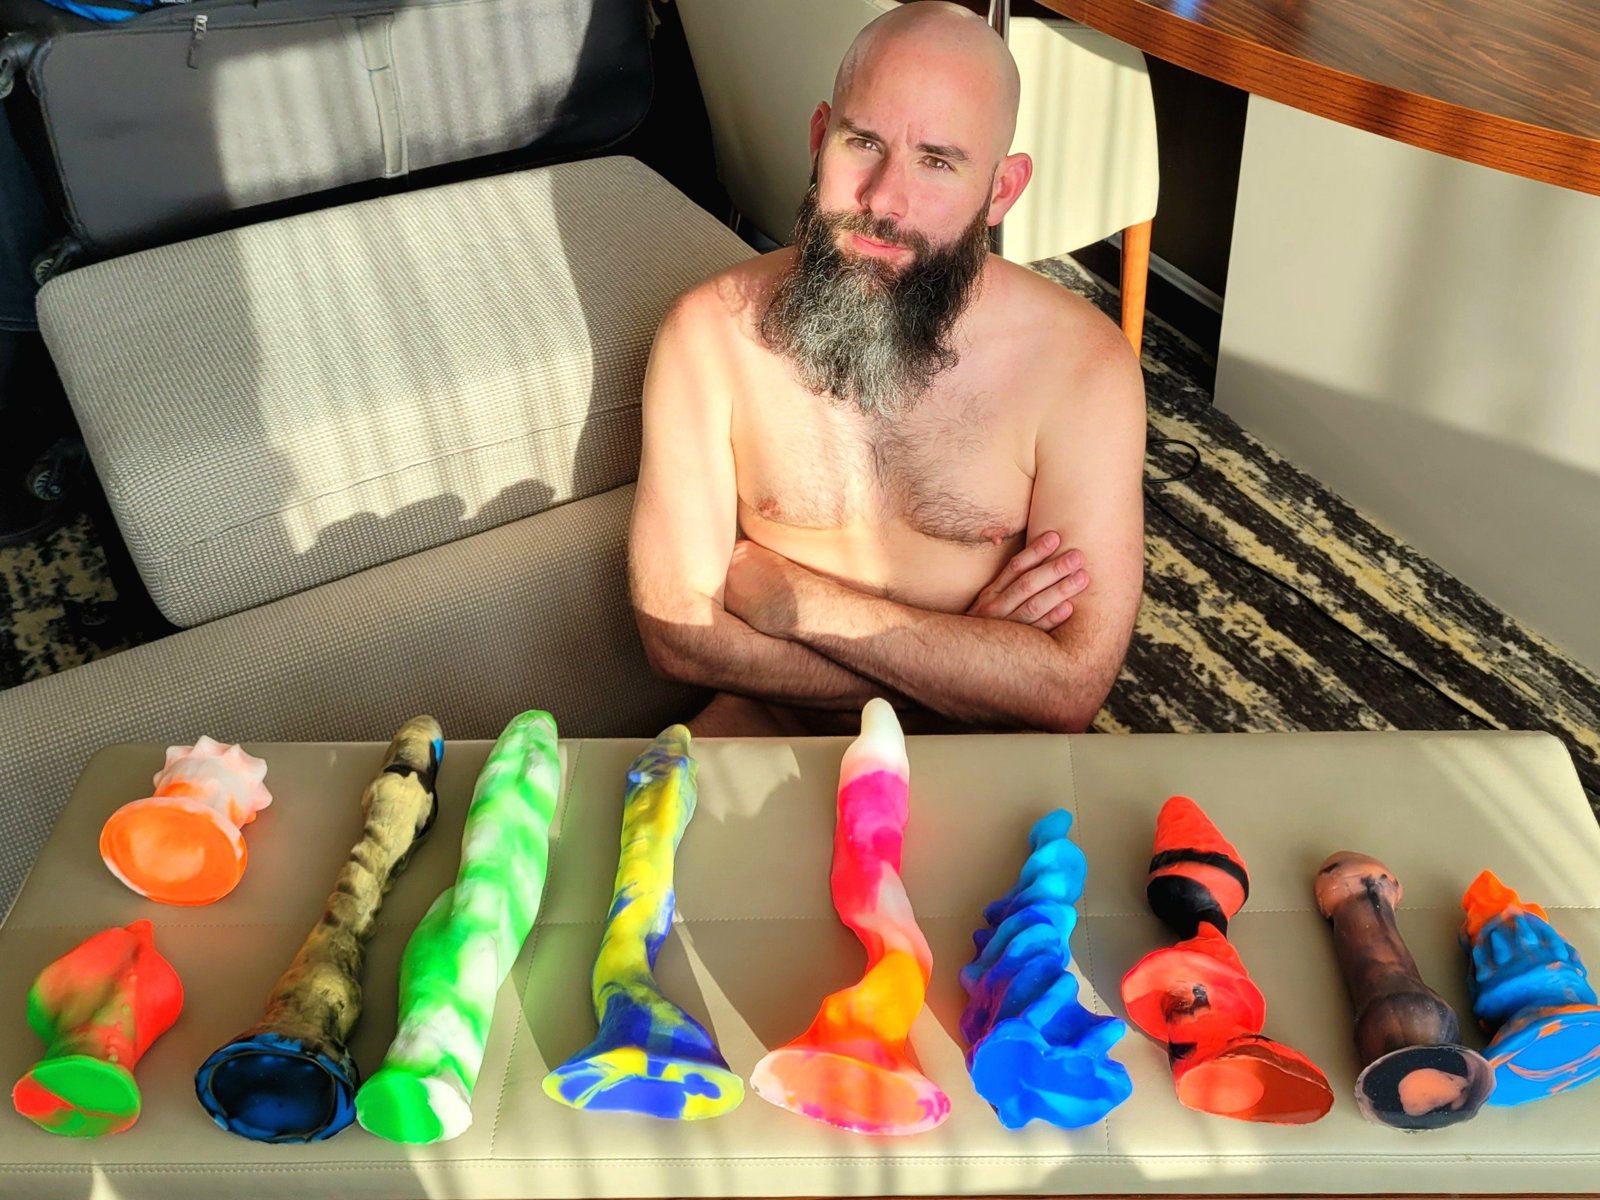 Photo by ParamoreMen with the username @ParamoreMen, who is a star user,  March 3, 2024 at 11:13 PM and the text says 'We're happy to announce our new "Friend of PM!"

THX_1138 is a smoldering hot otter daddy who makes crazy handmade silicone toys for those who wonder what it's like to get fucked by an alien. (Find his toys at https://linktr.ee/kernos)
These toys show..'